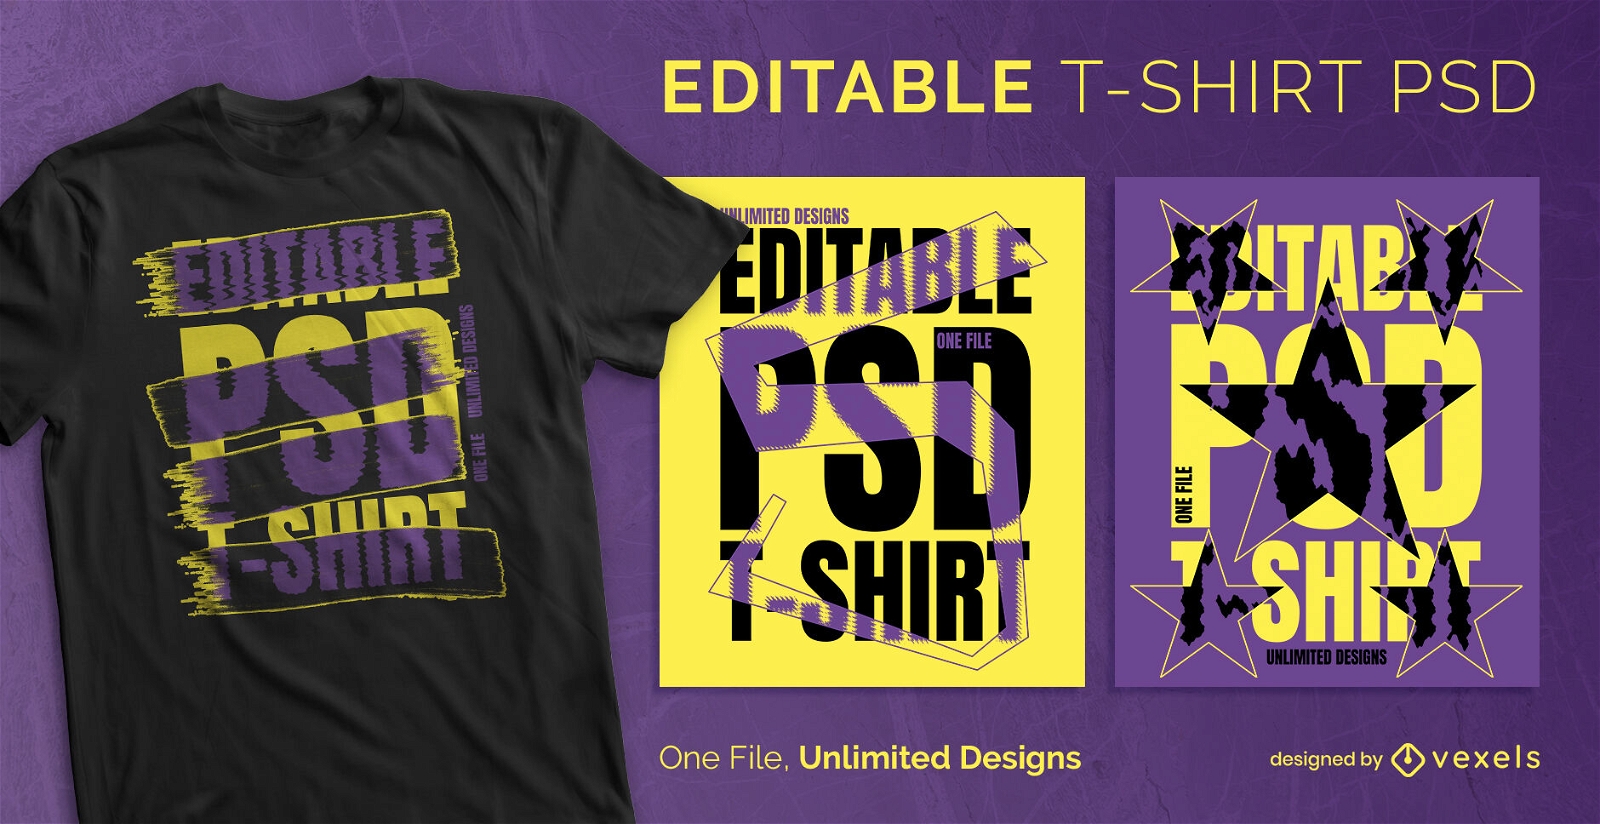 Distorted texts scalable t-shirt psd